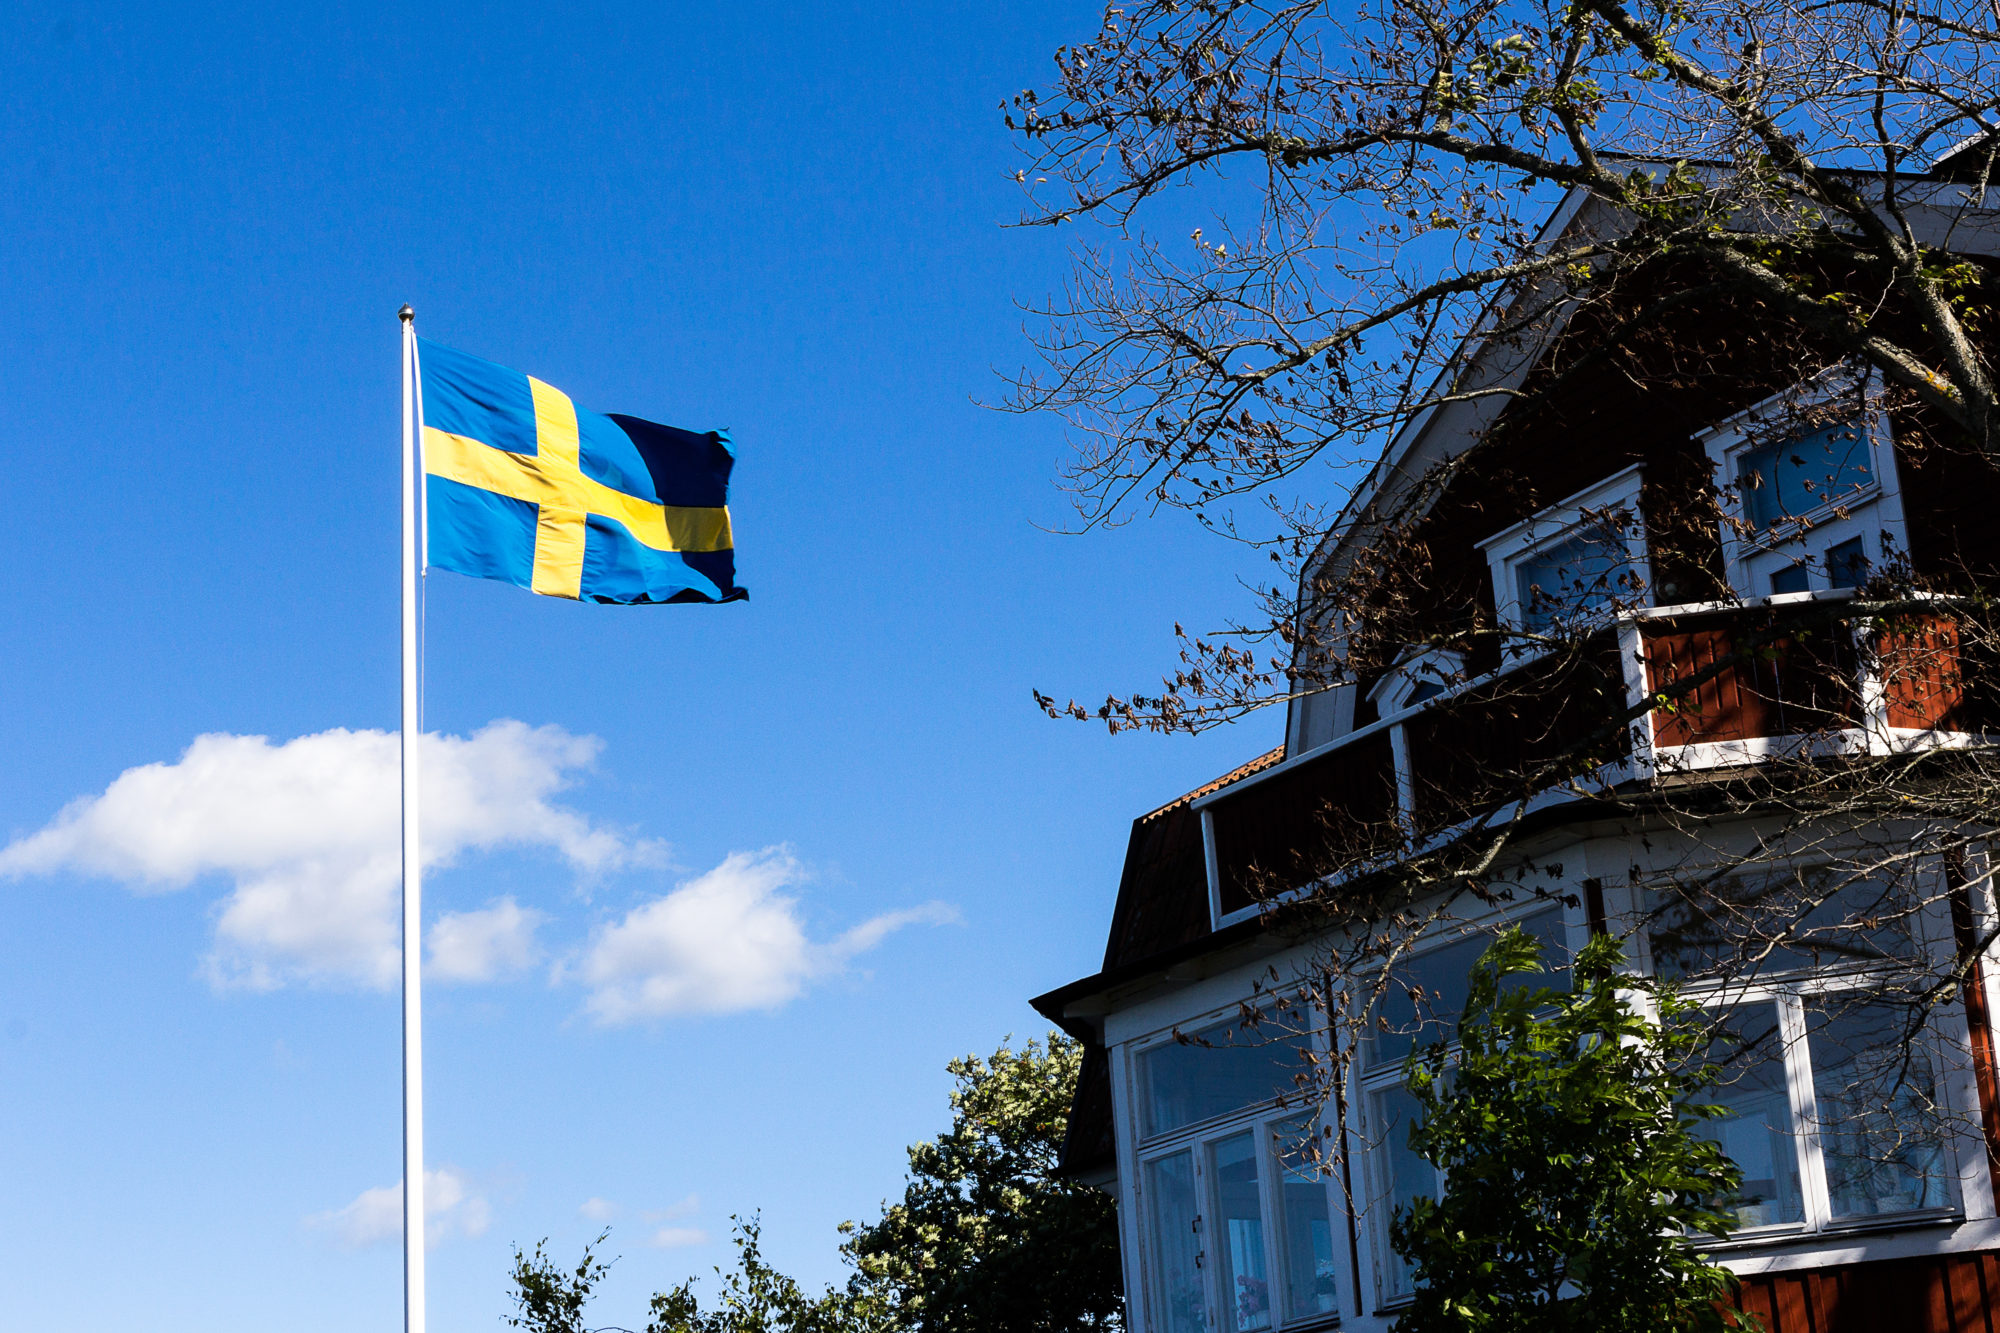 A swedish flag is wavering in the wind in front of a characteristic swedish home.